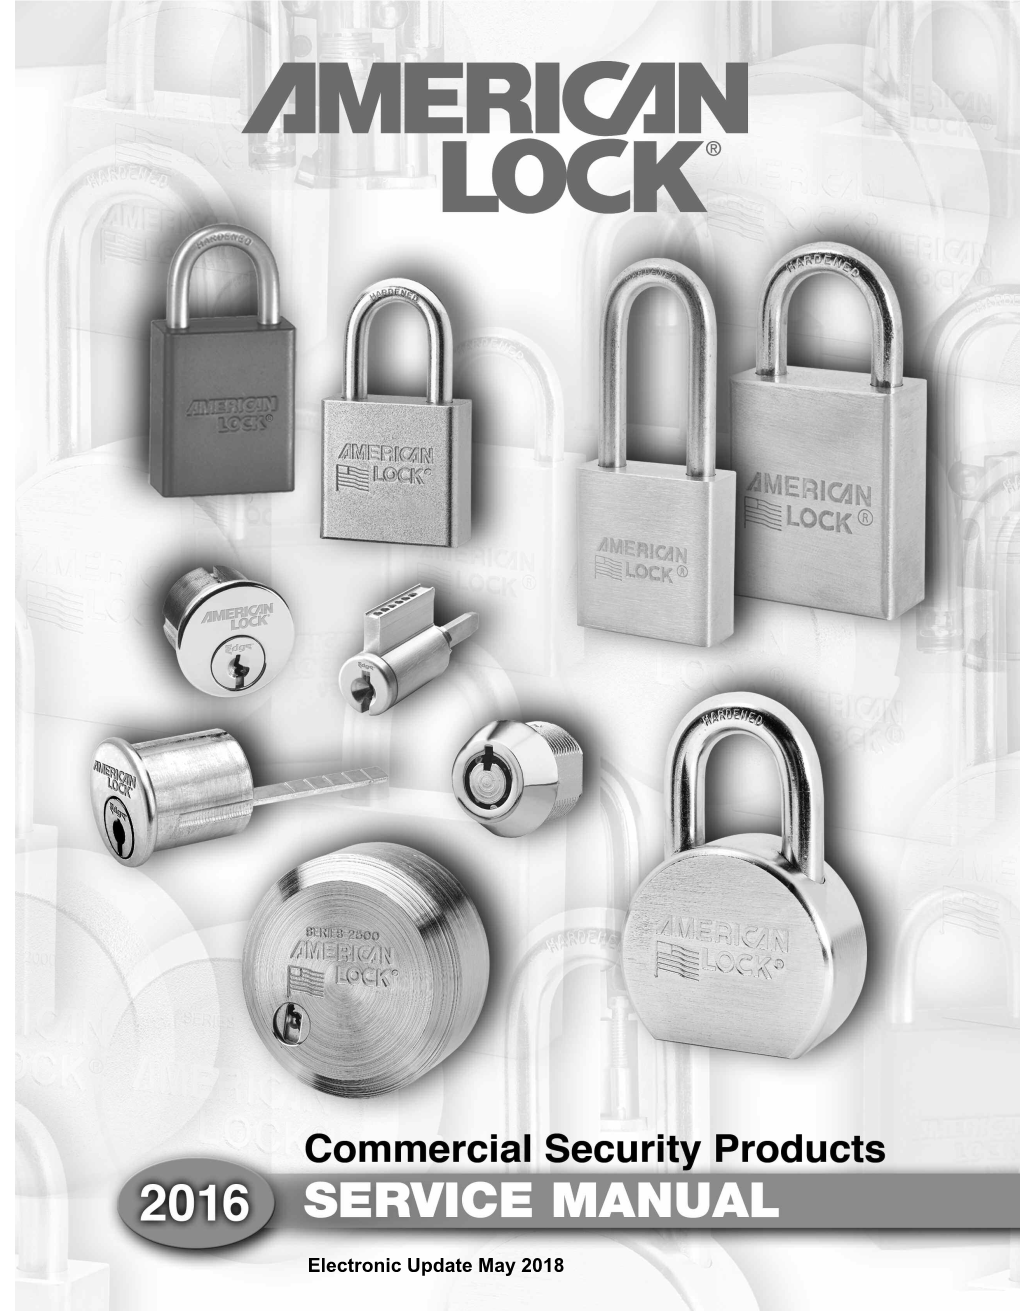 A-004 American Lock Products Service Manual